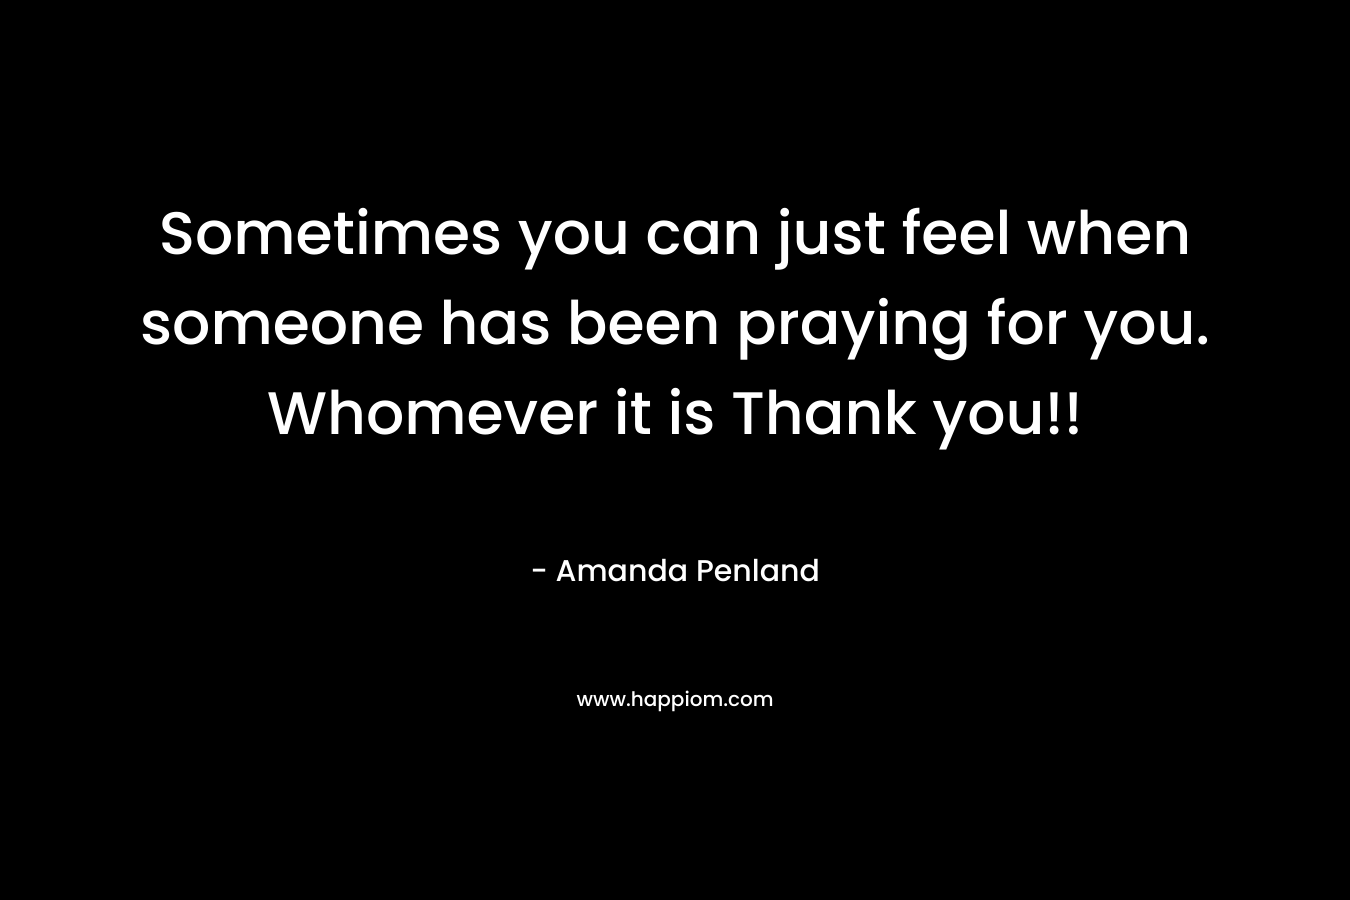 Sometimes you can just feel when someone has been praying for you. Whomever it is Thank you!!